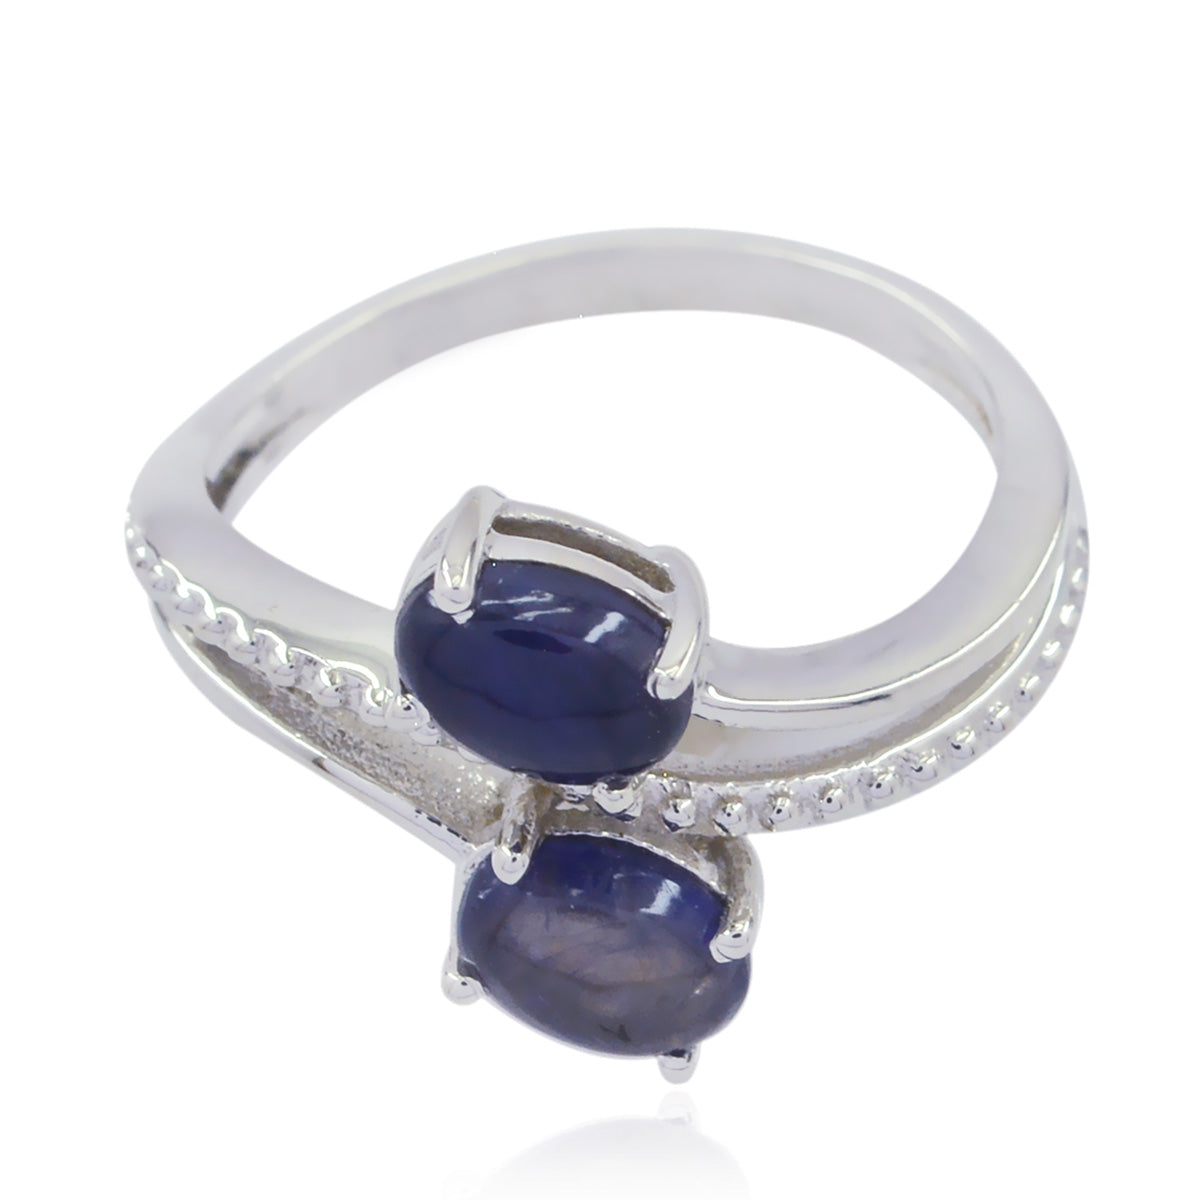 Riyo Flawless Gem Iolite Sterling Silver Ring Most Expensive Jewelry